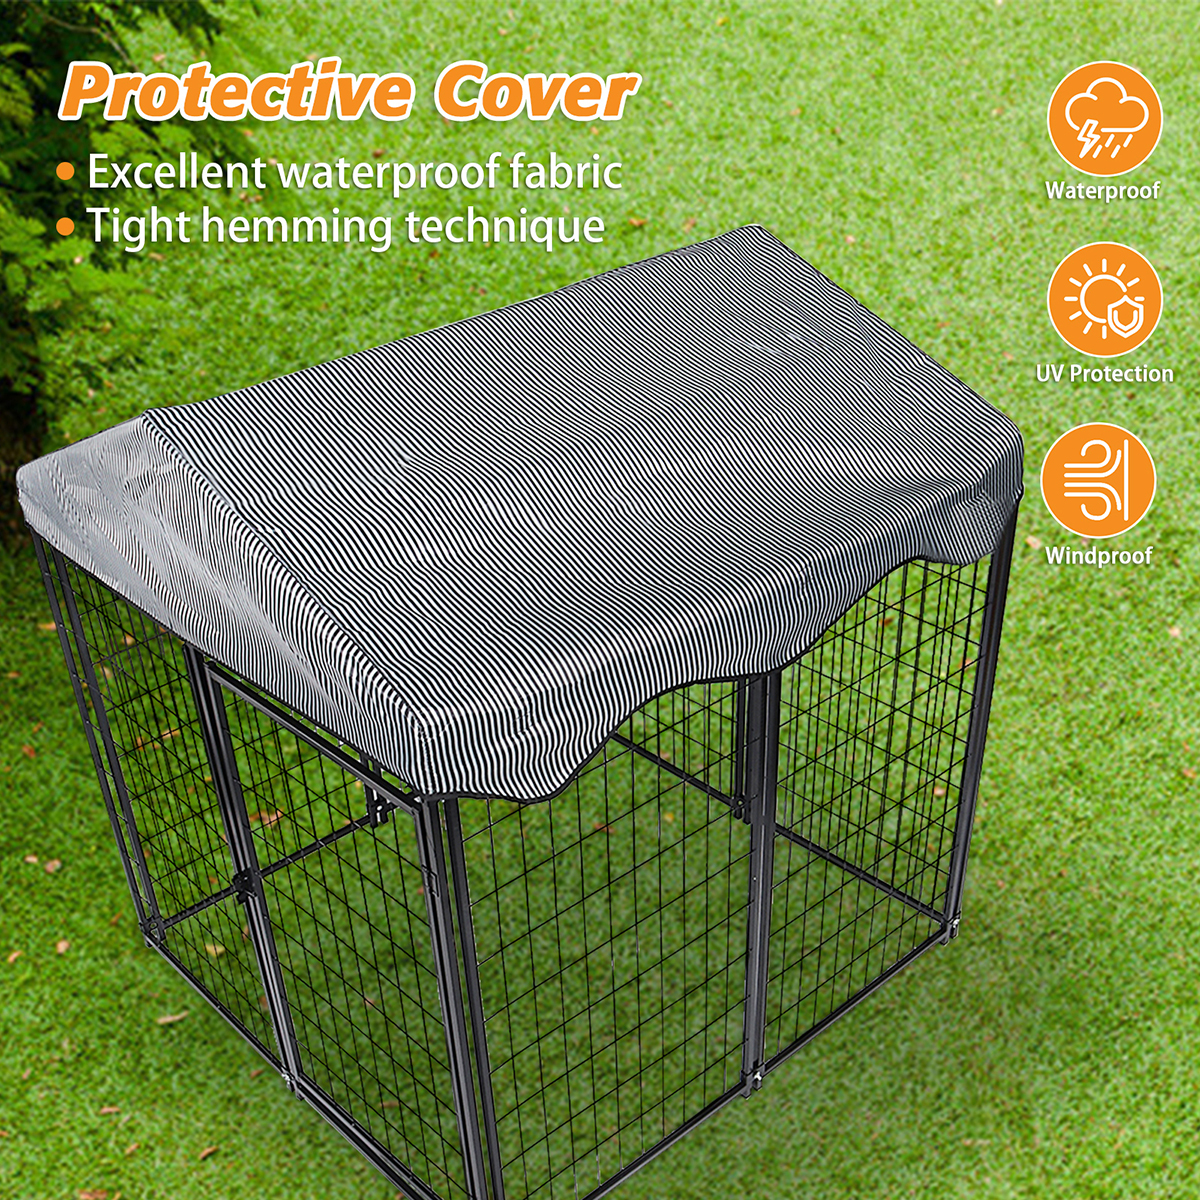 PawGiant Large Dog Kennel Outdoor Dog House with Roof 4ft x 4.2ft x 4.45ft Heavy Duty Metal for Large to Small Dog, Outside Dog Kennel Pet Crate Cage Playpen with UV-Proof Waterproof Cover